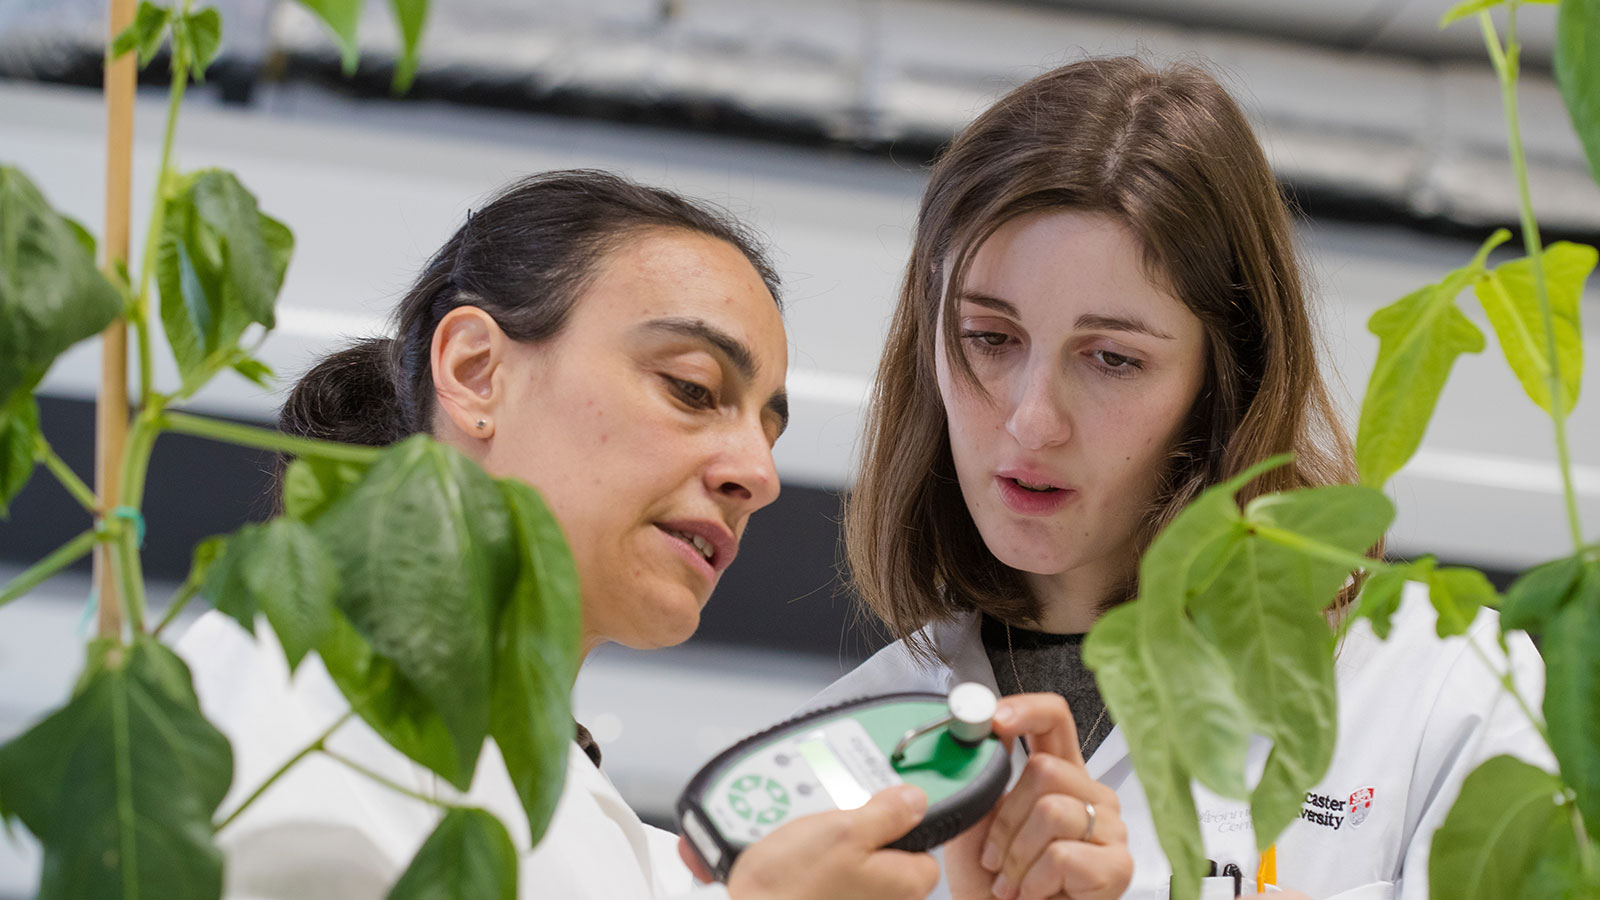 Two research taking measurements from plants in a lab.